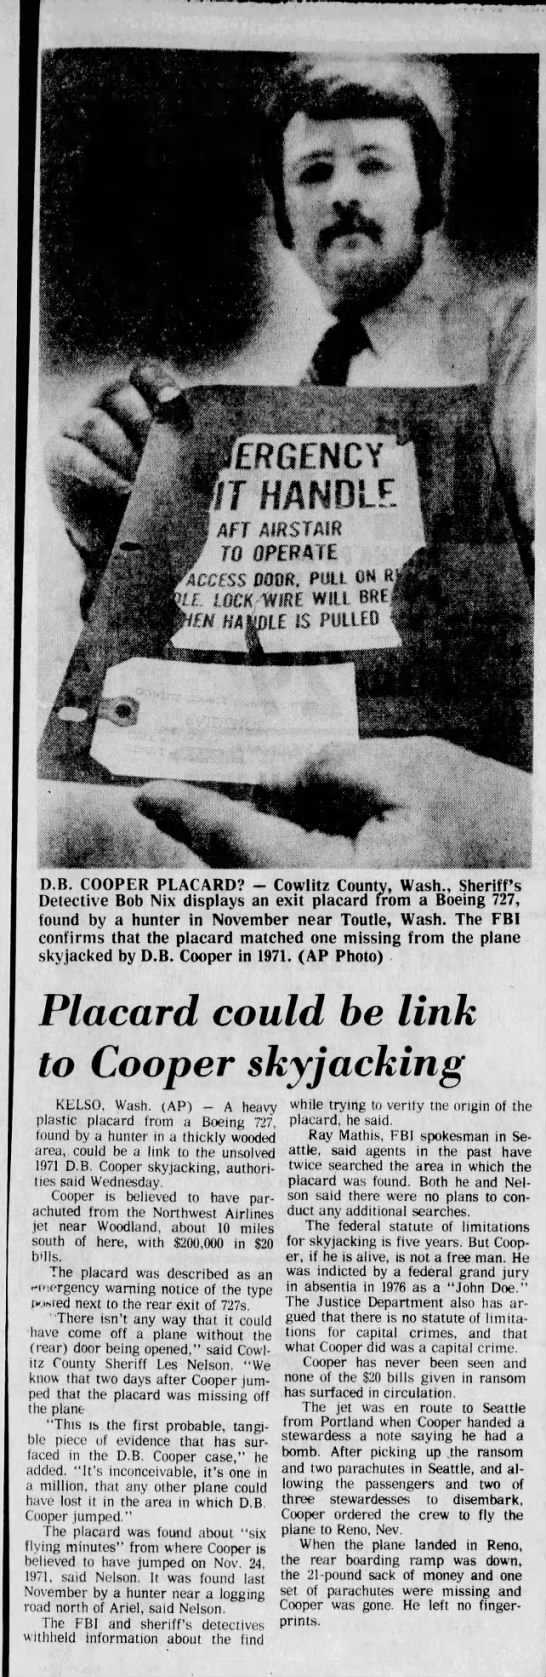 Man finds Boeing airplane placard that may be linked to D.B. Cooper case - 